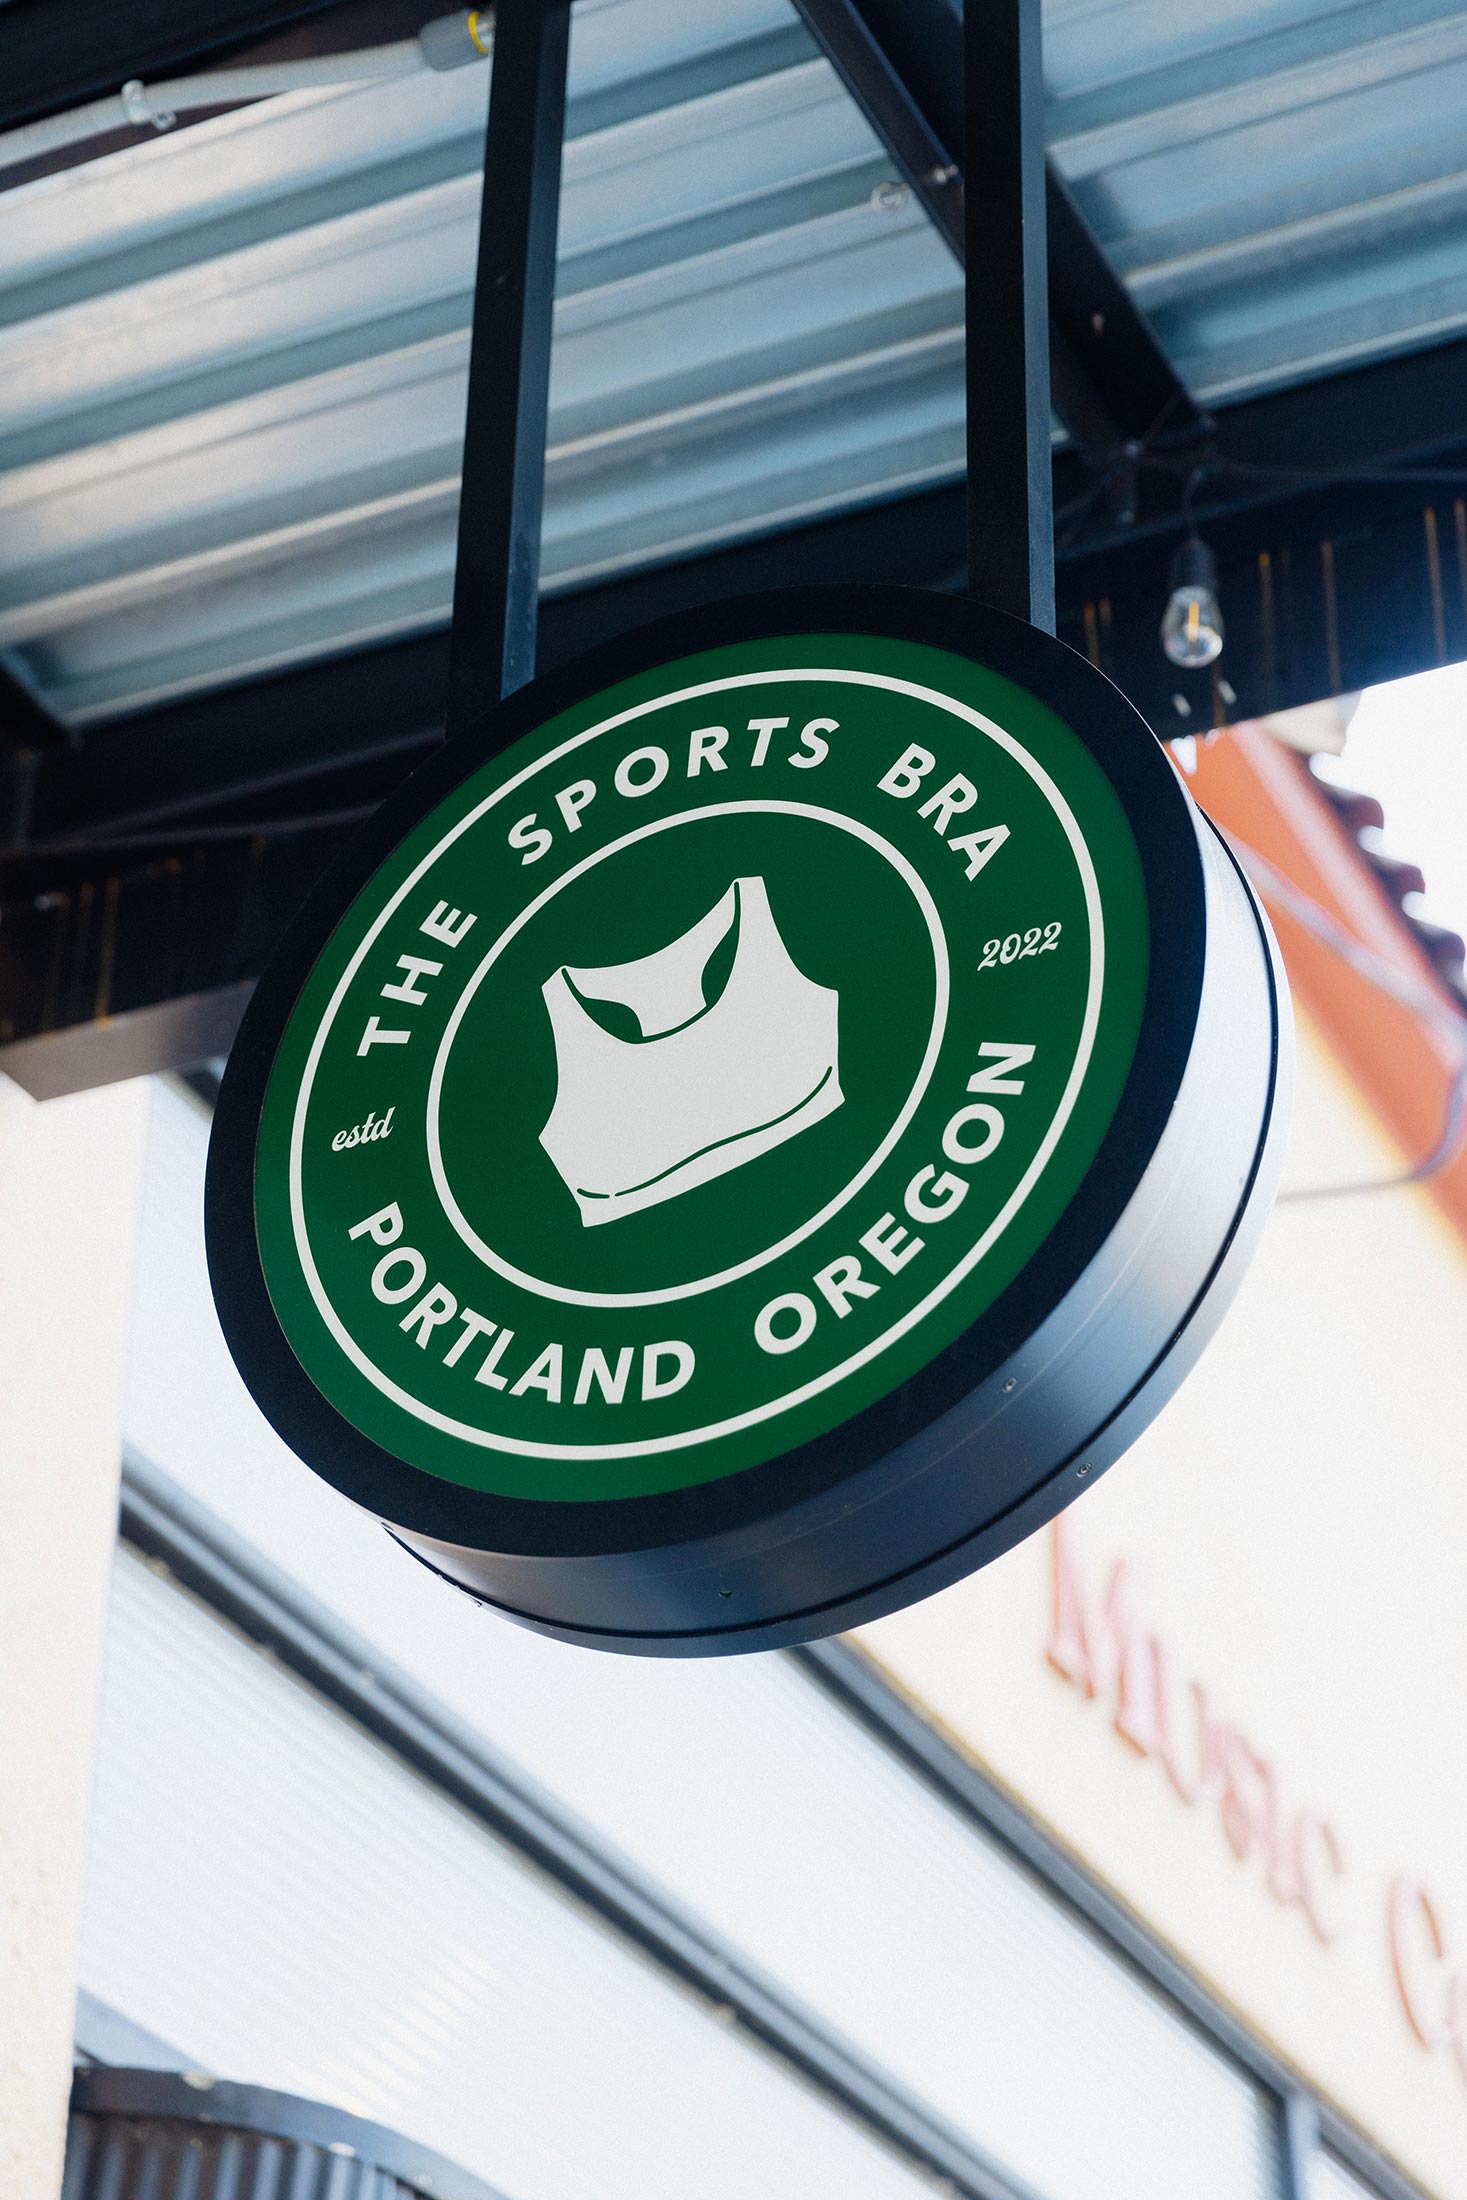 This Portland chef is opening The Sports Bra — a pub that will